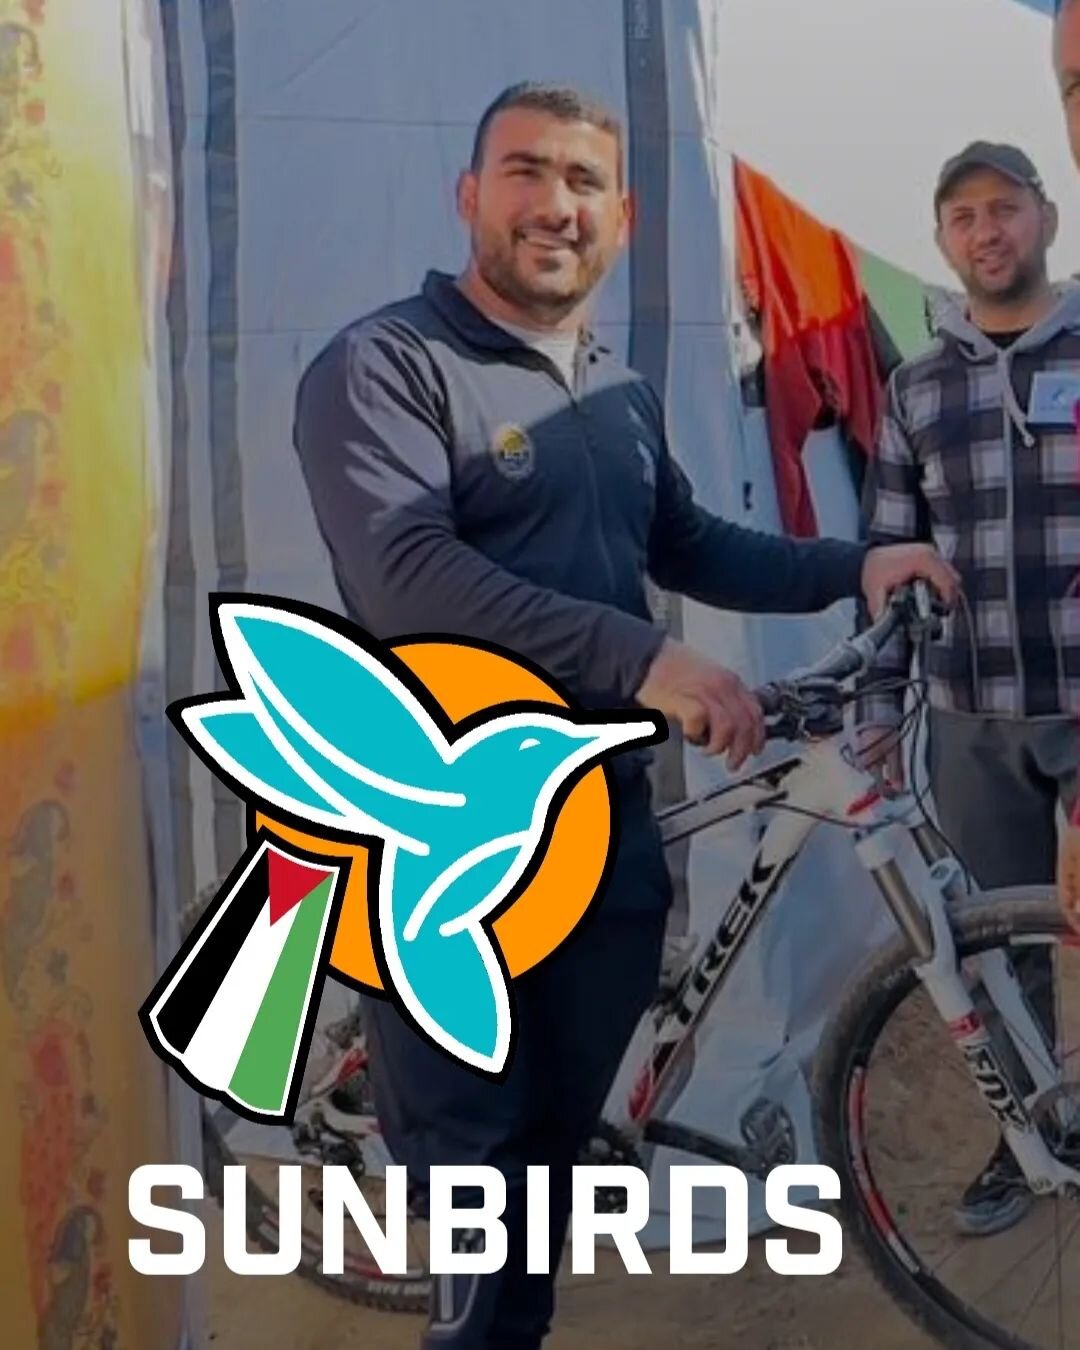 Another inspirational group that Goods for Gaza supports is @gazasunbirds . Gaza Sunbirds is a team of para athletes responding to the genocide in Gaza by collecting and distributing food and other essential items. The Sunbirds are not aid workers, t